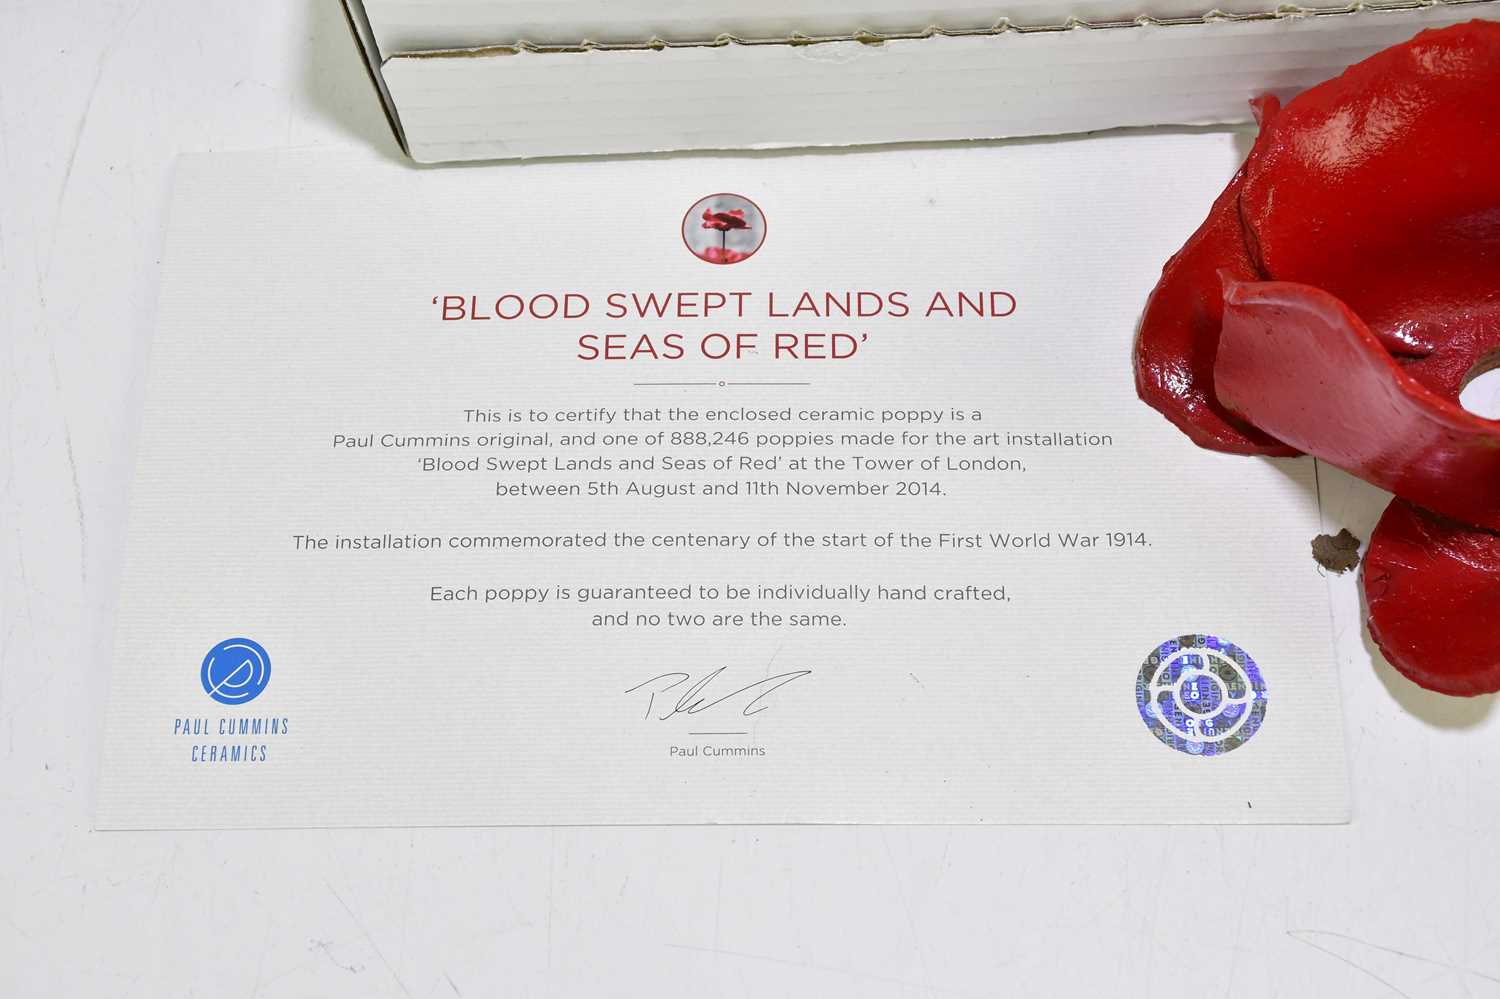 PAUL CUMMINS; a limited edition ceramic poppy, 'Blood, Sweat, Lands and Seas of Red', one of the - Image 2 of 2